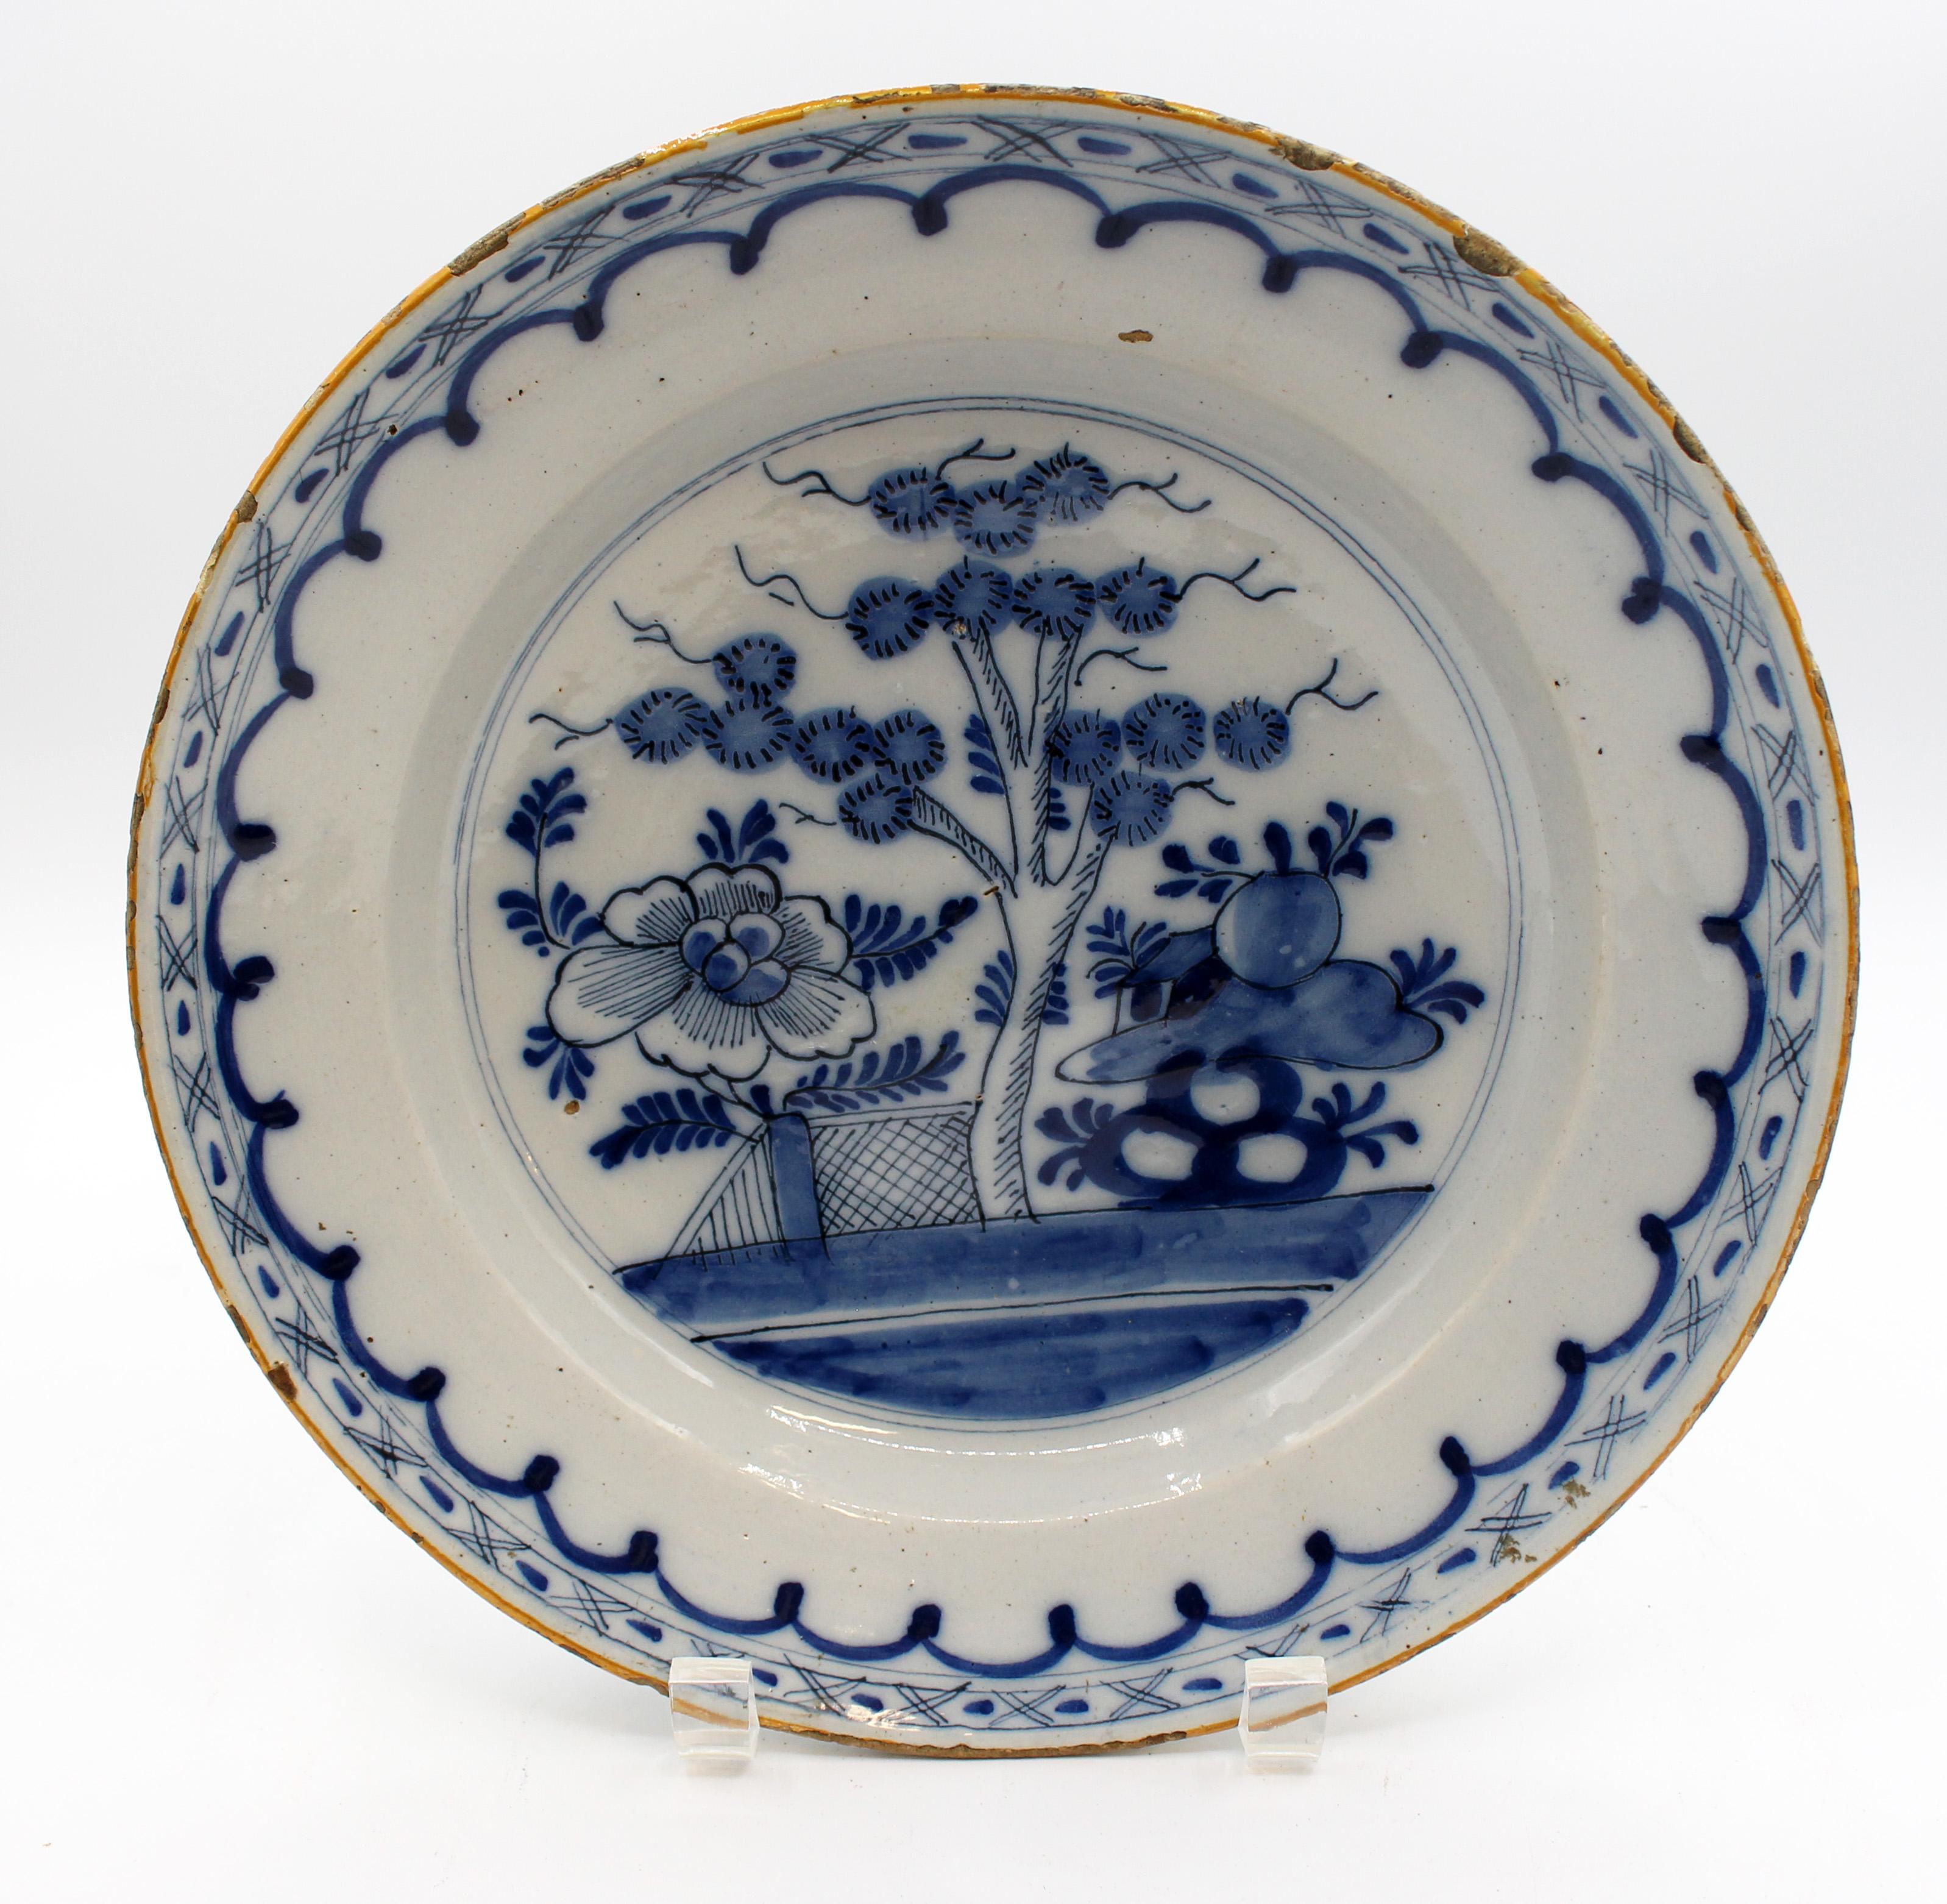 Neoclassical Late 18th Century Delft Chop Plate